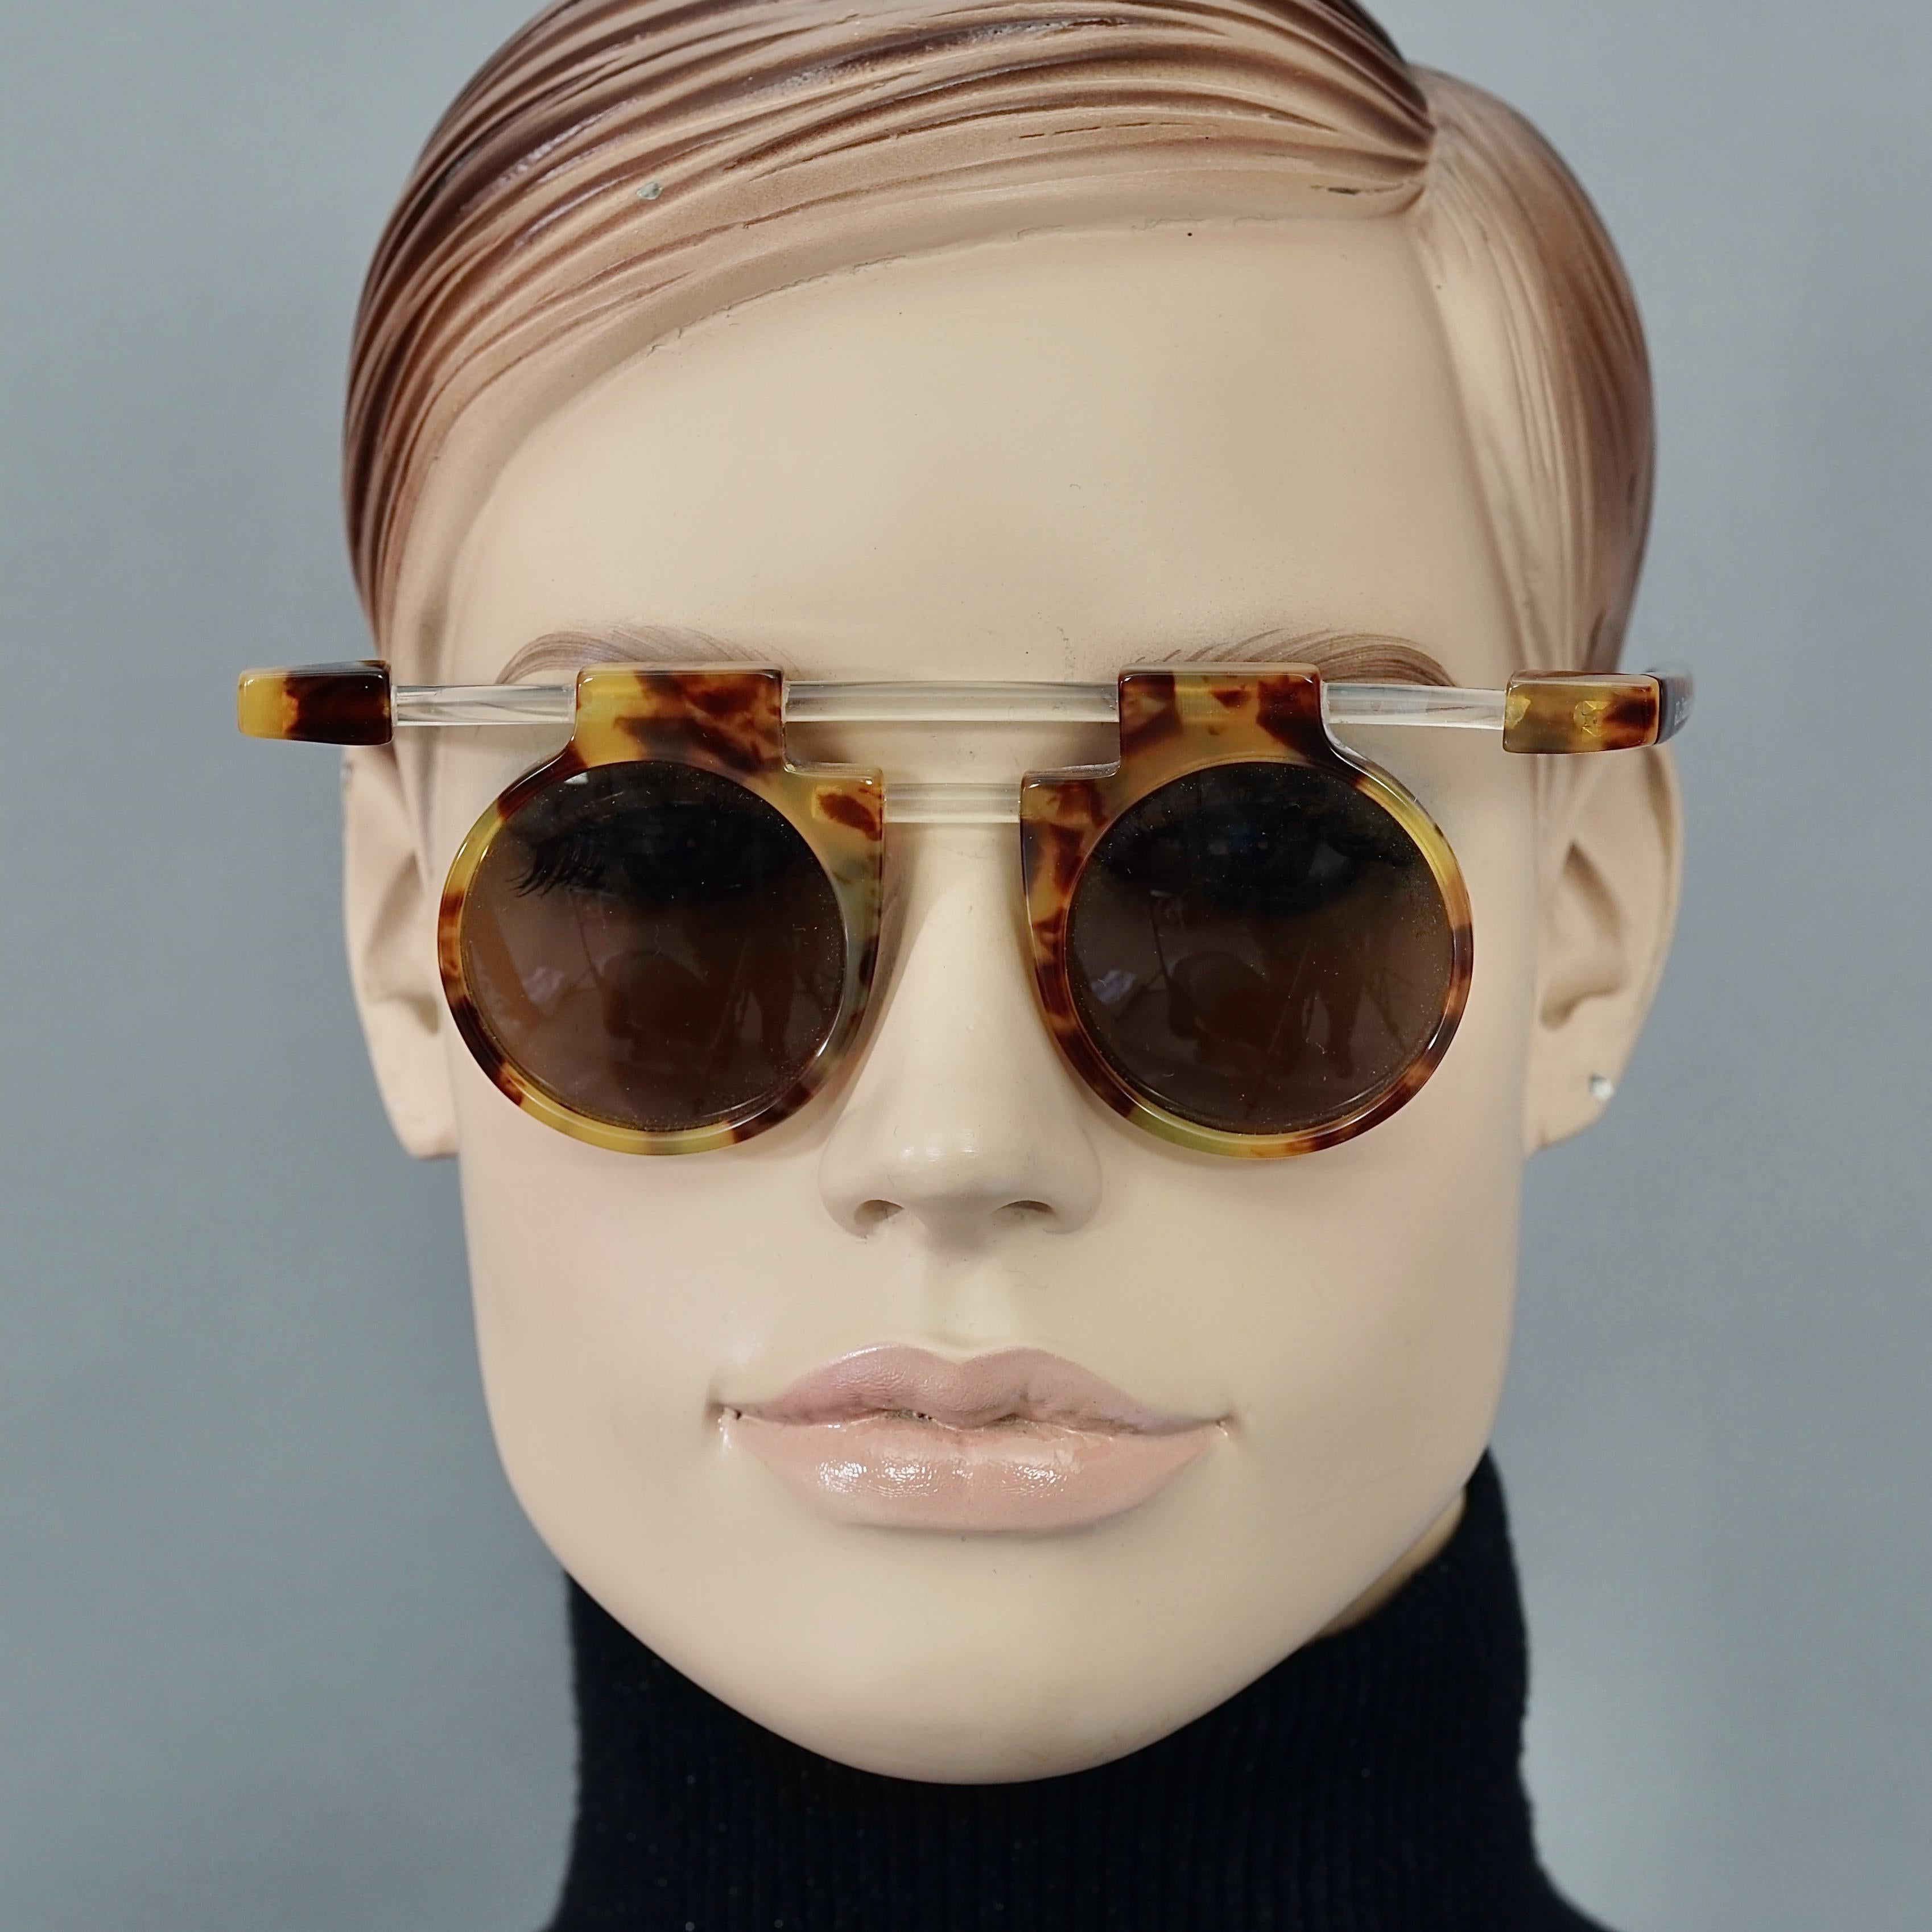 Vintage JEAN CHARLES de CASTELBAJAC Lucite Tortoiseshell Futuristic Sunglasses

Measurements:
Frame Height: 2 inches (5.10 cm)
Hinge to hinge Width: 5.70 inches (14.5 cm)
Temples: 5.39 inches (13.7 cm)

Features:
- 100% Authentic JEAN CHARLES de